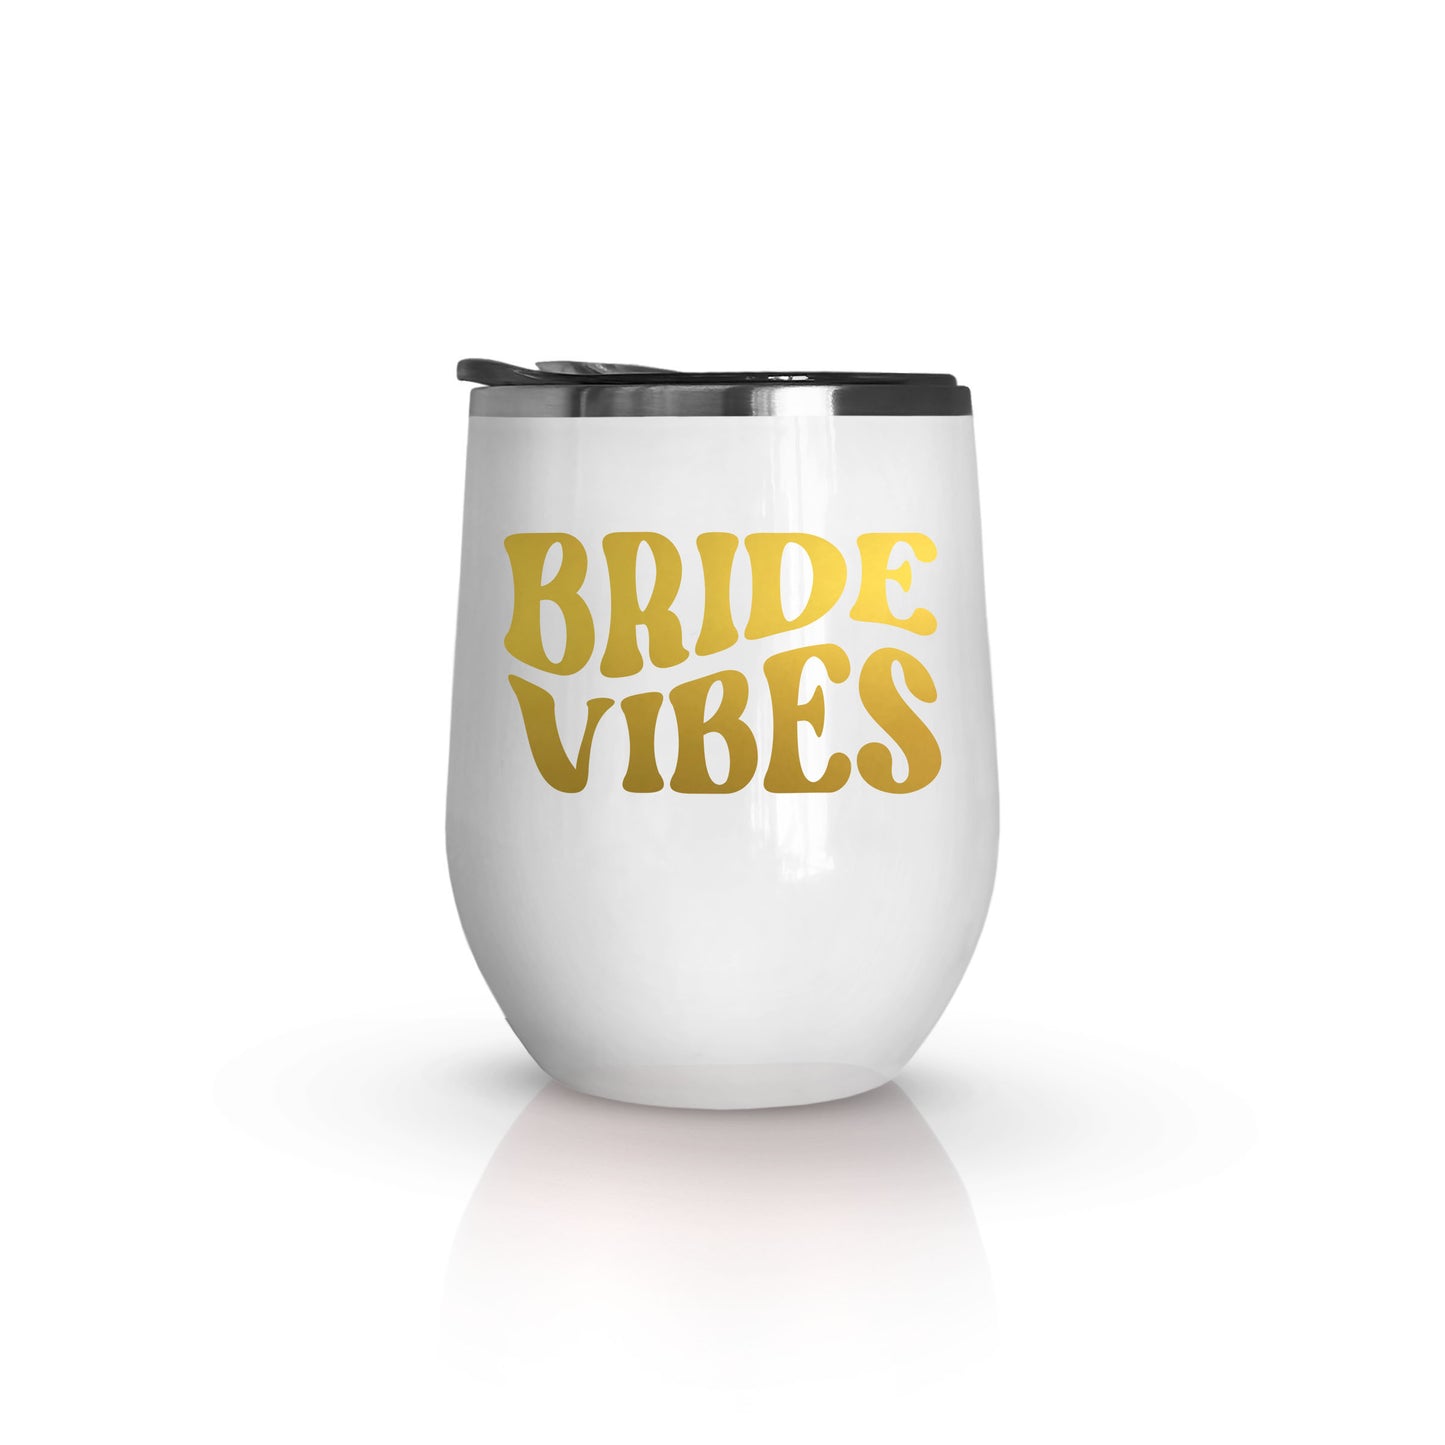 Bride Vibes, Bach Vibes Wine Tumblers